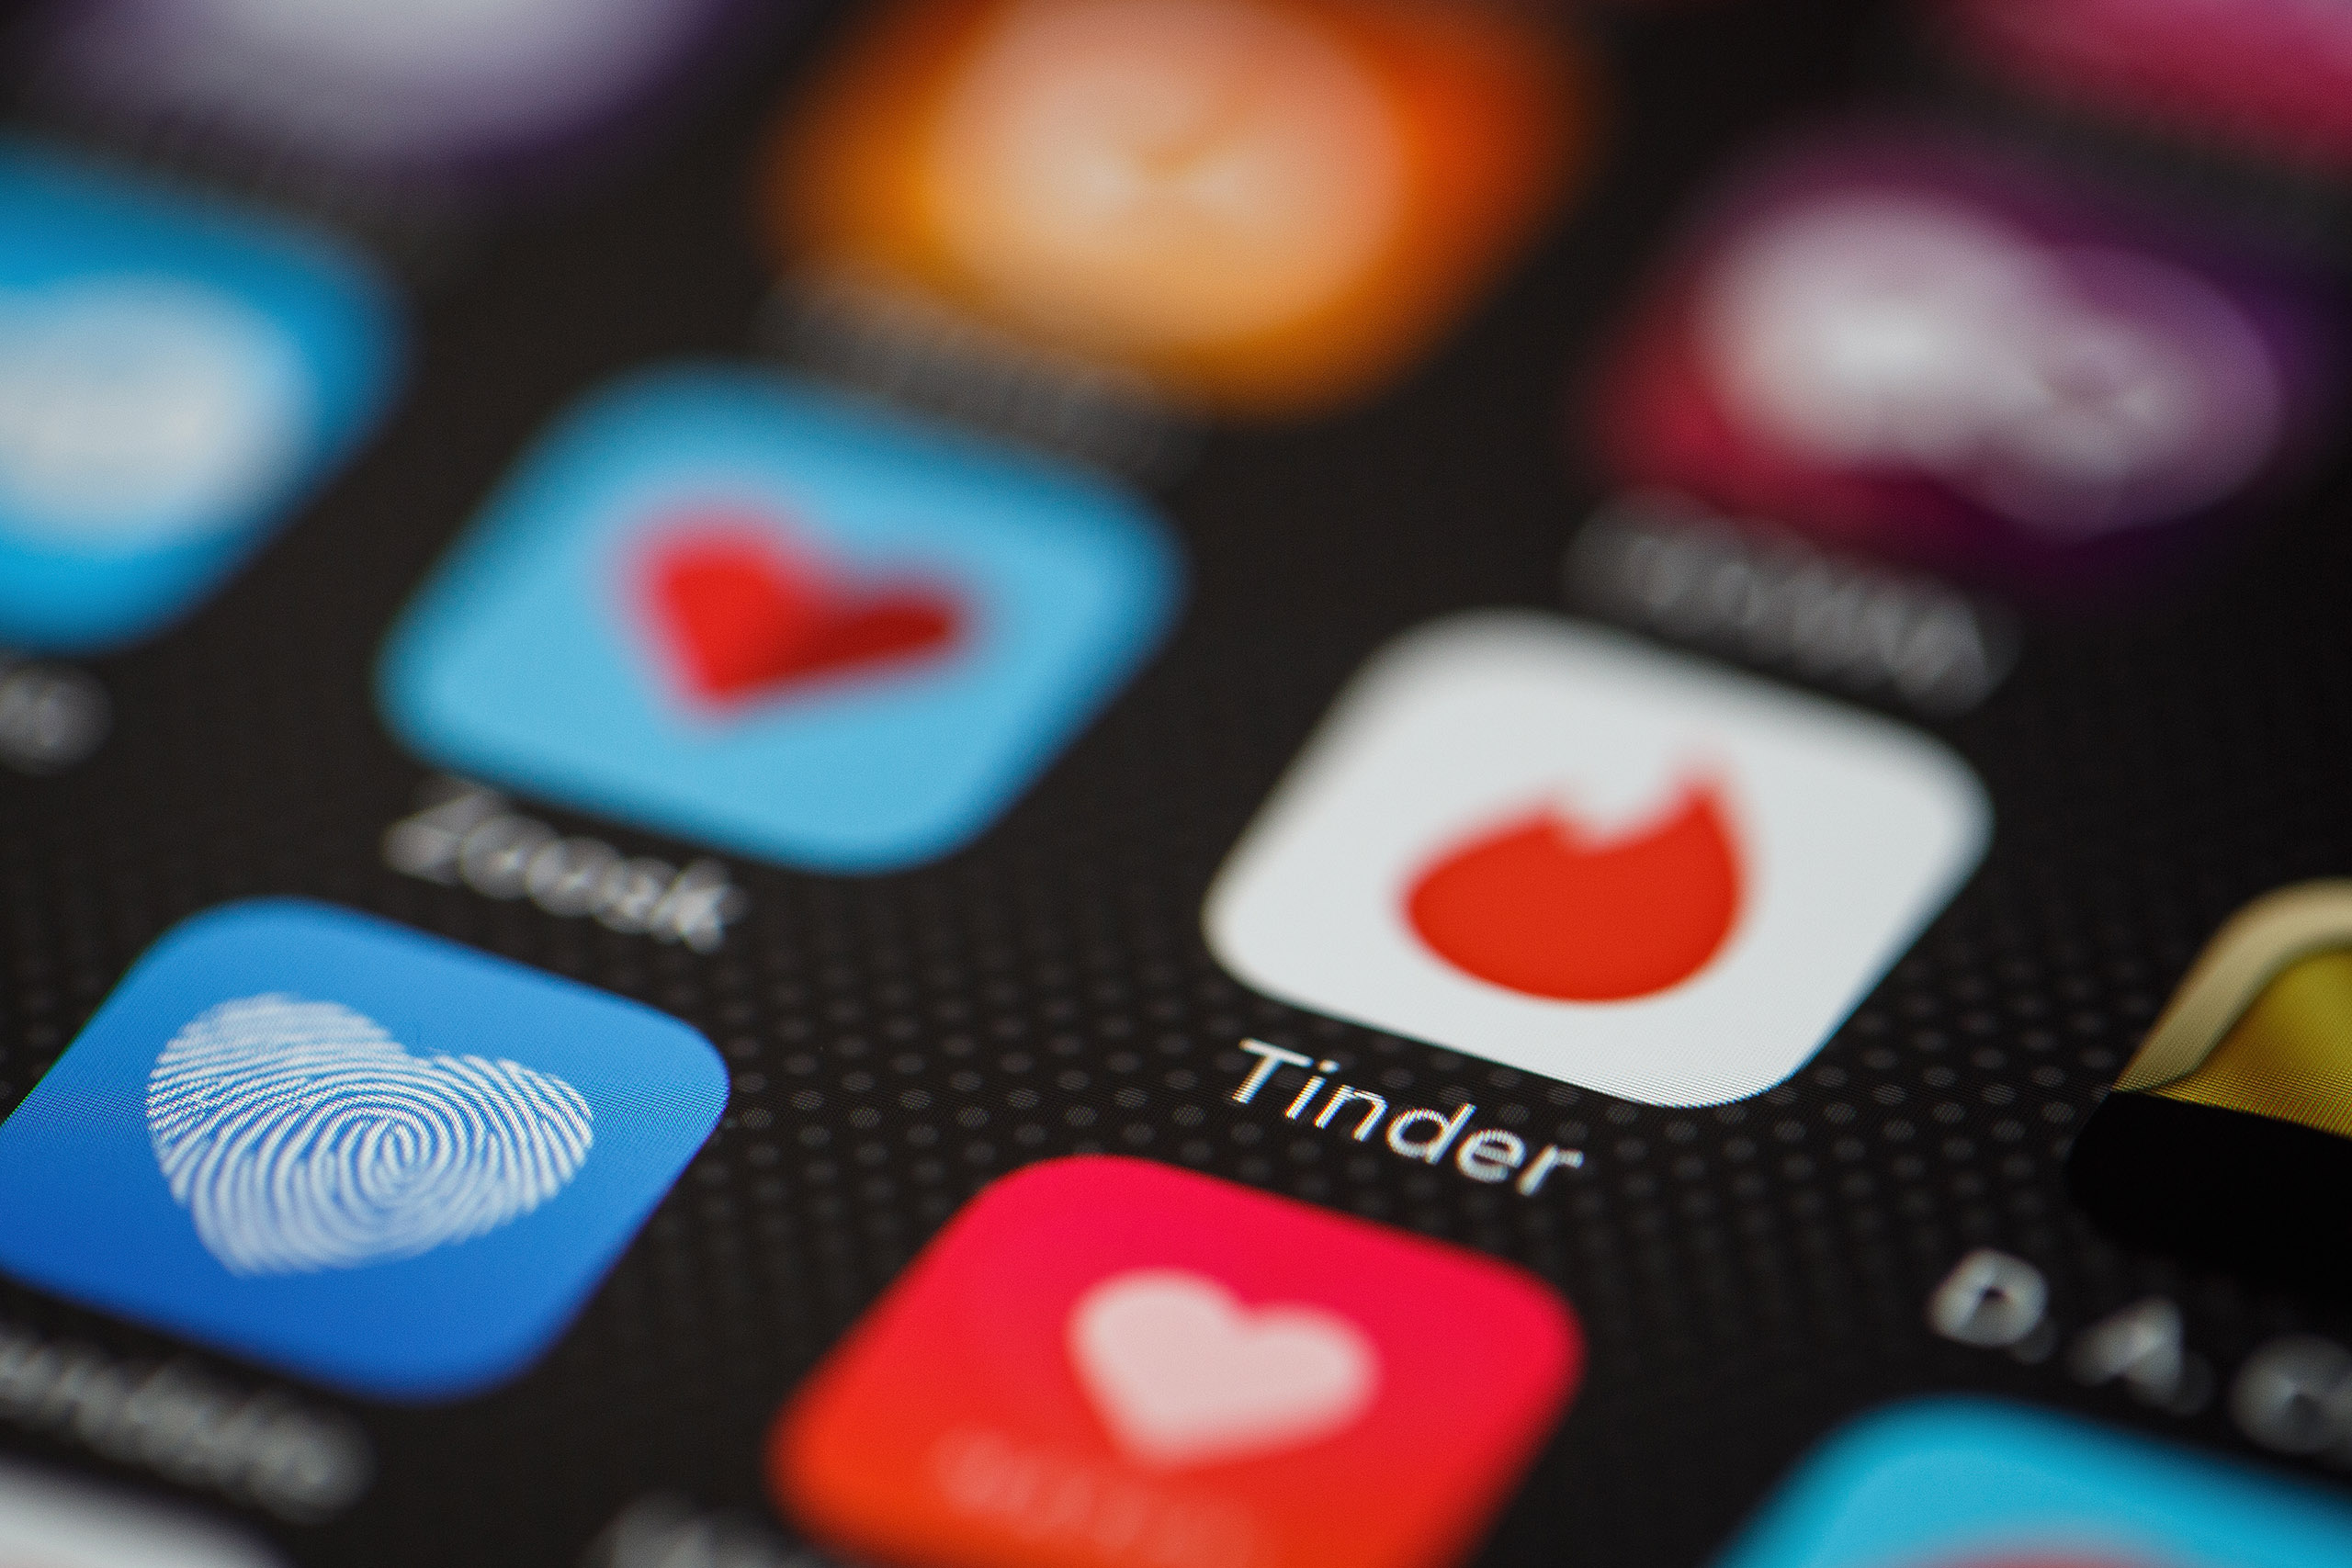 The "Tinder" app logo is seen amongst other dating apps on a mobile phone screen on Nov. 24, 2016. (Leon Neal—Getty Images)